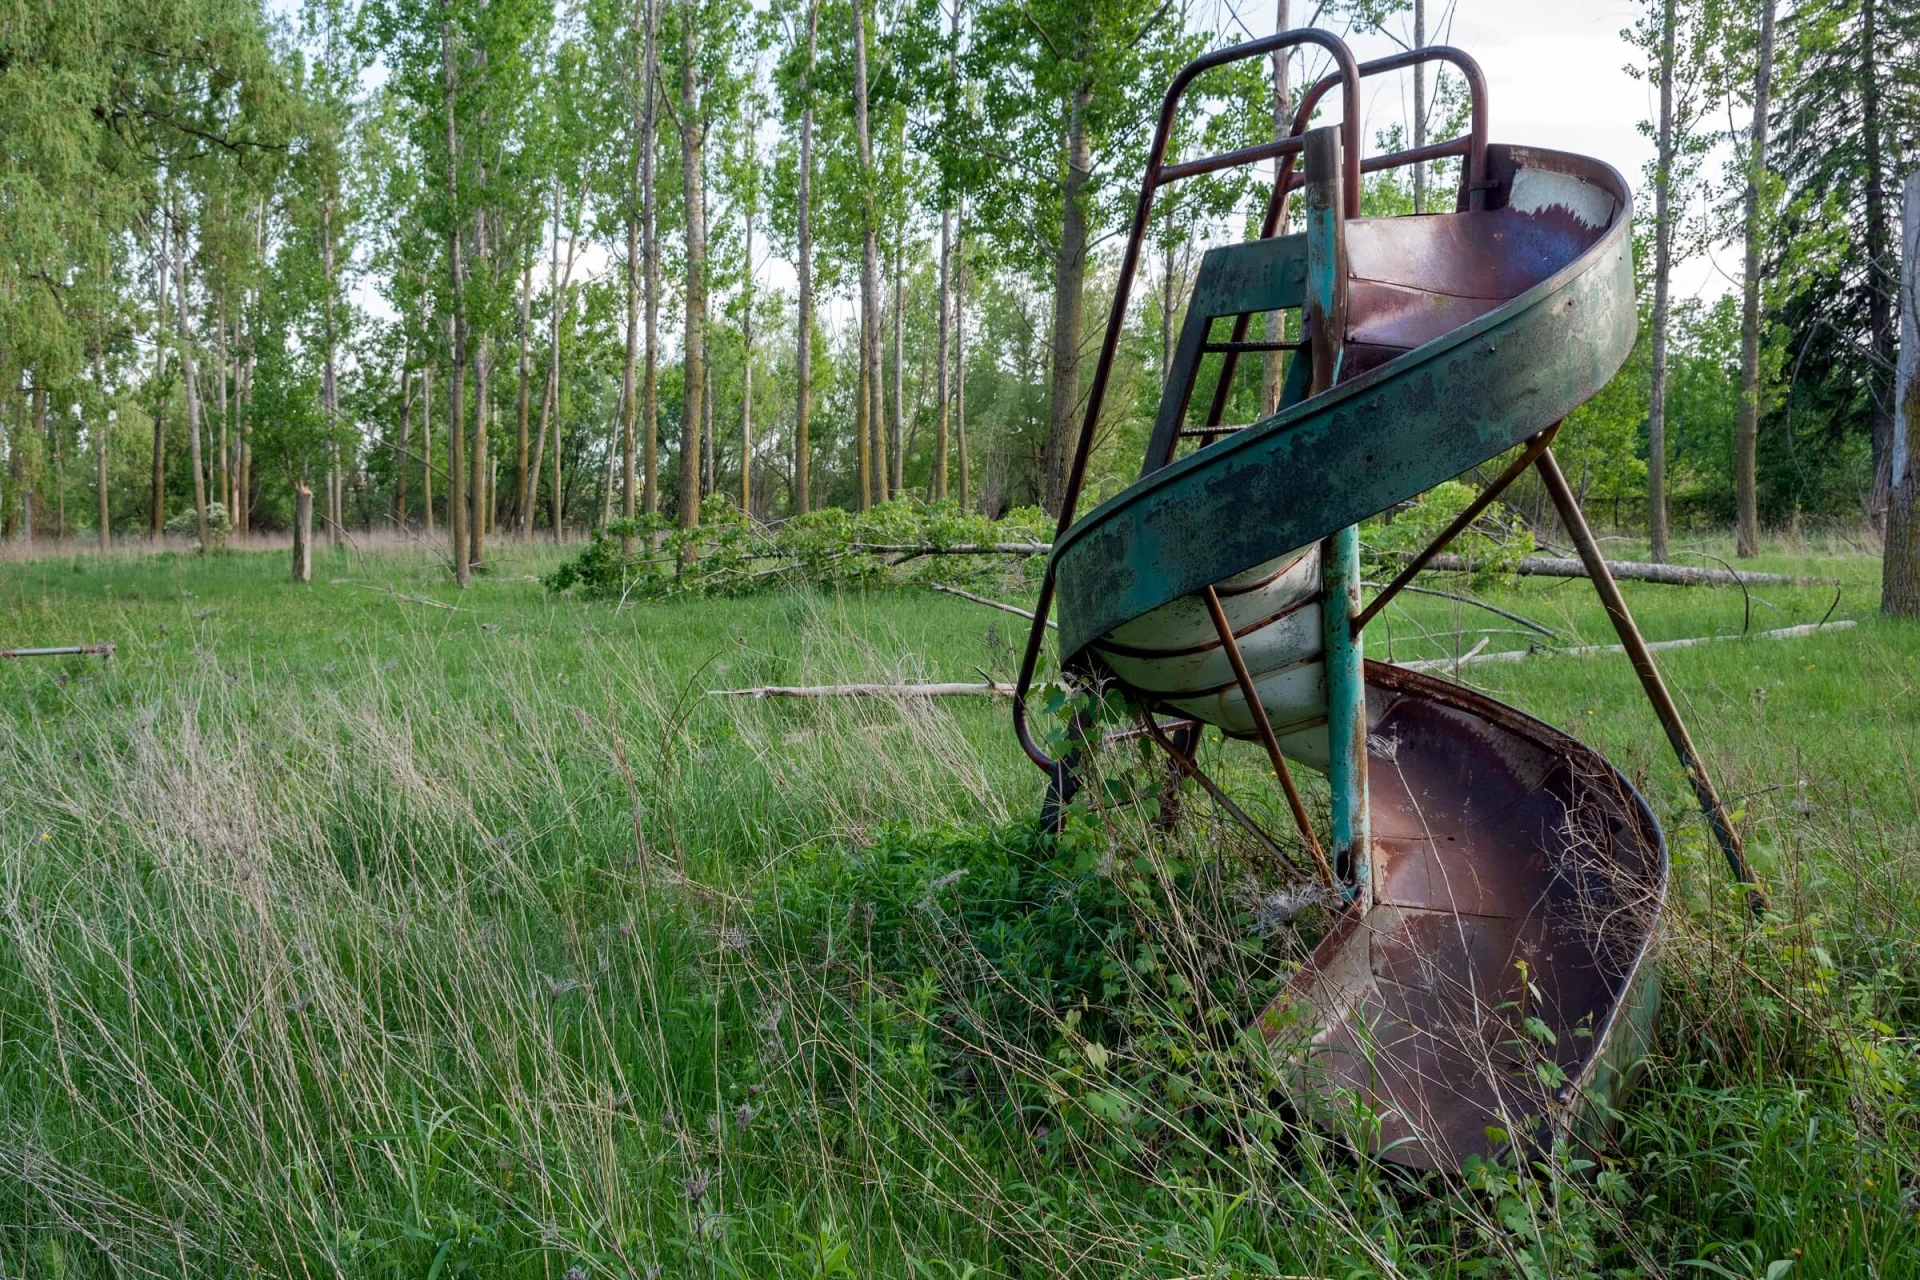 a rusty slide in the middle of a grassy field.